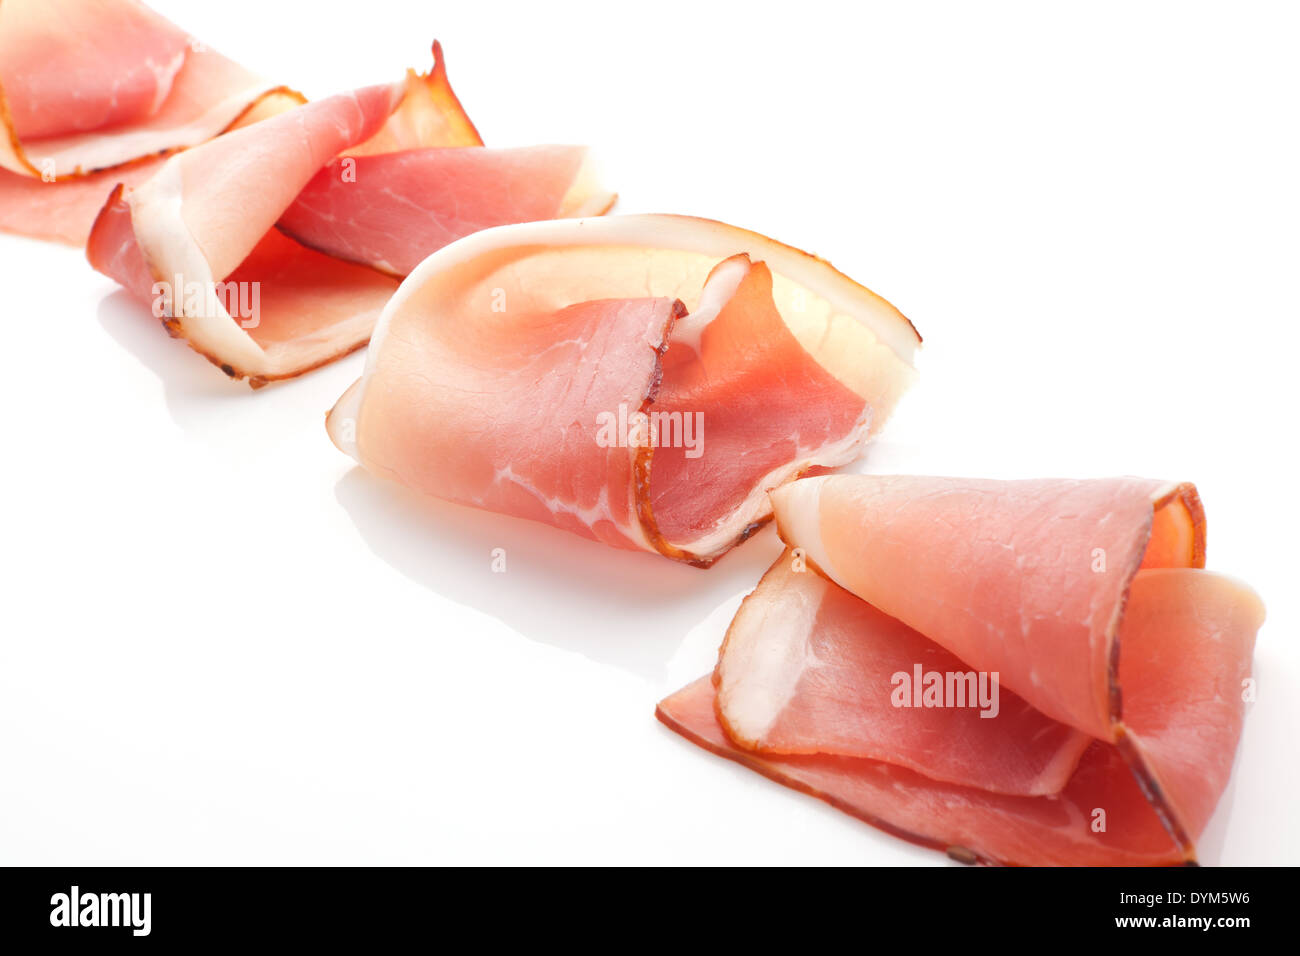 Prosciutto slices arranged isolated on white background. Culinary traditional meat. Stock Photo